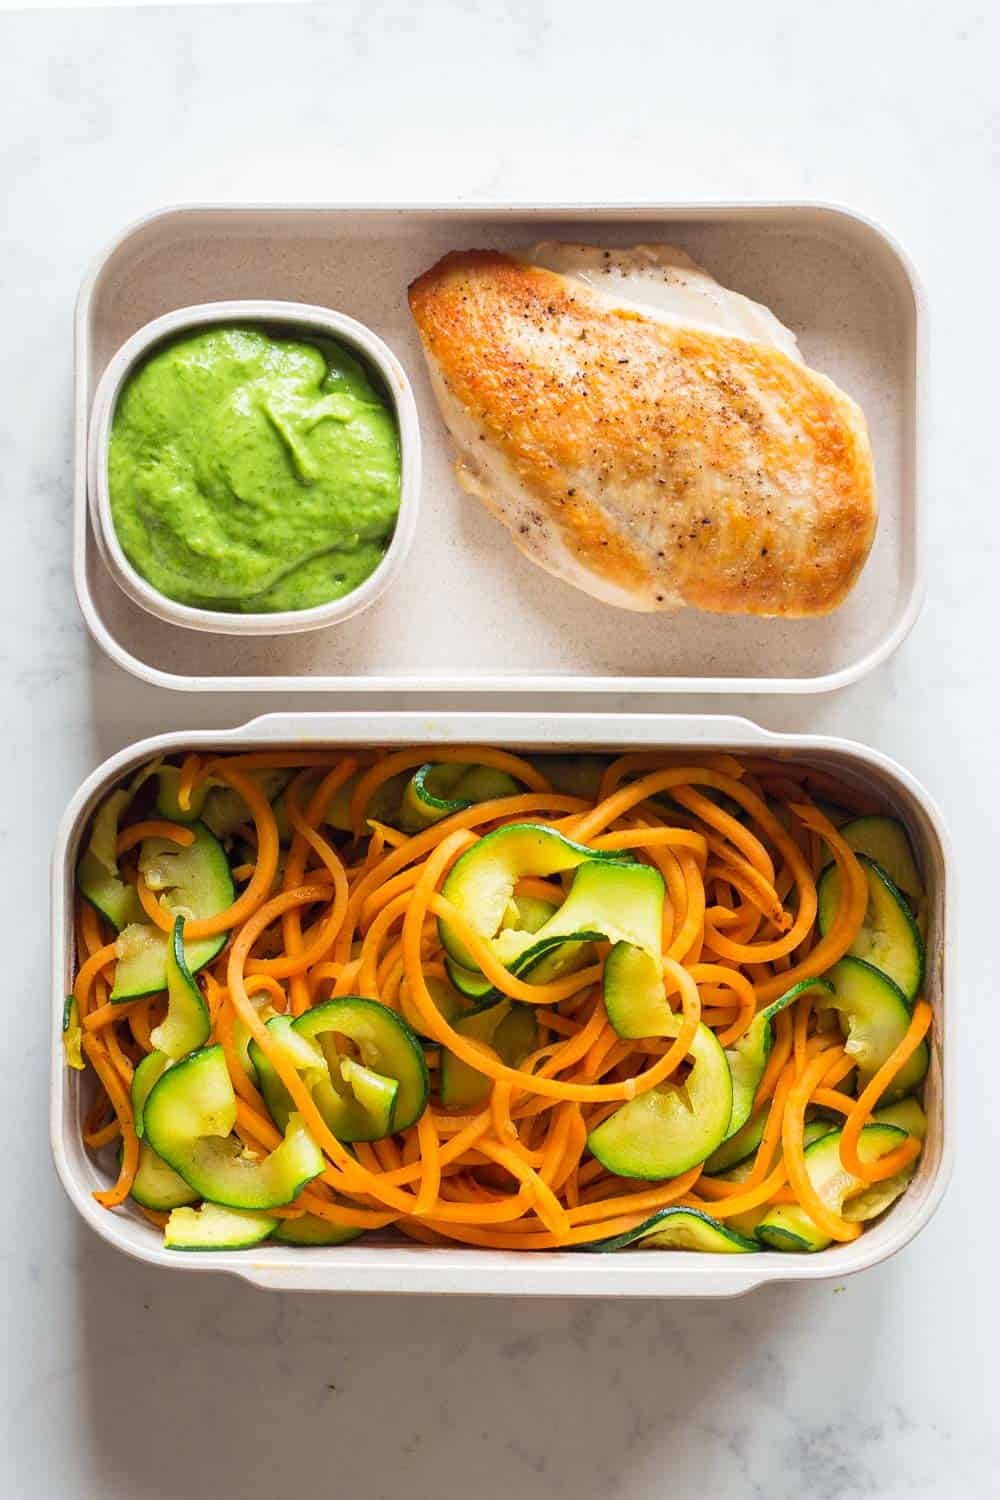 Two meal prep containers filled with pan-fried chicken breast, stir-fried spiralized sweet potato and zucchini with an avocado cilantro dressing on the side.